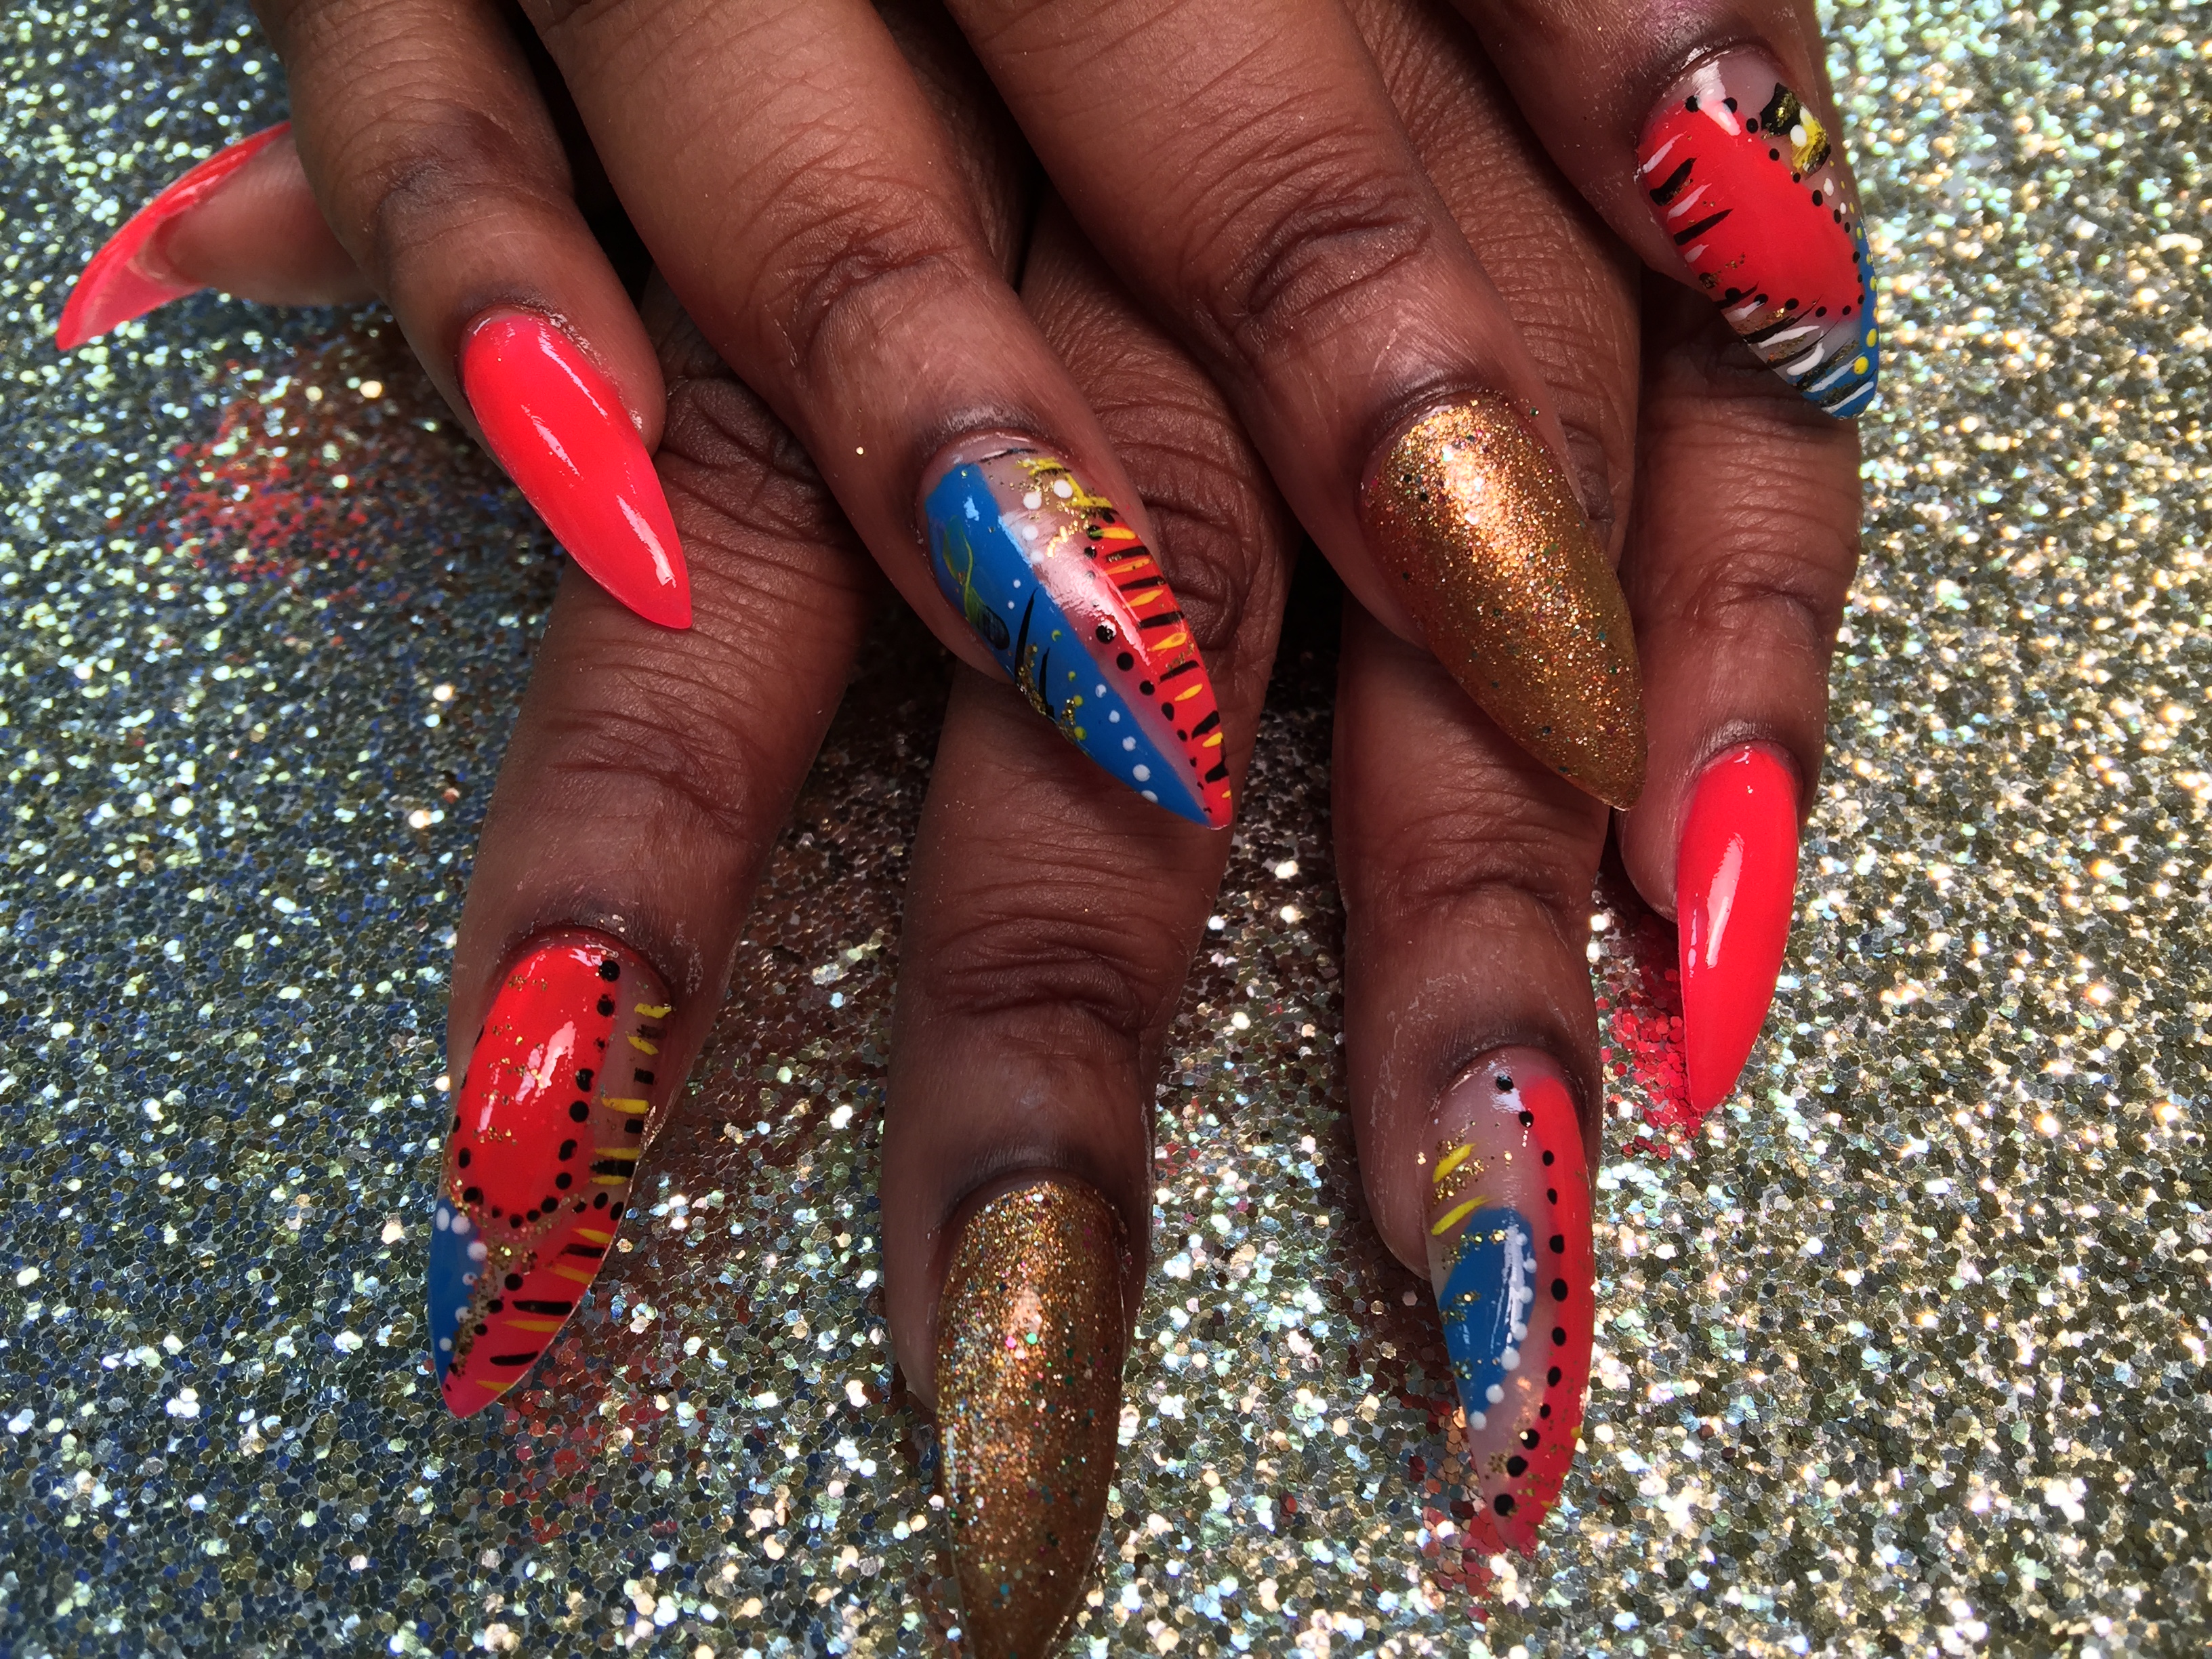 10. African American Nail Art Designs for Natural Nails - wide 3